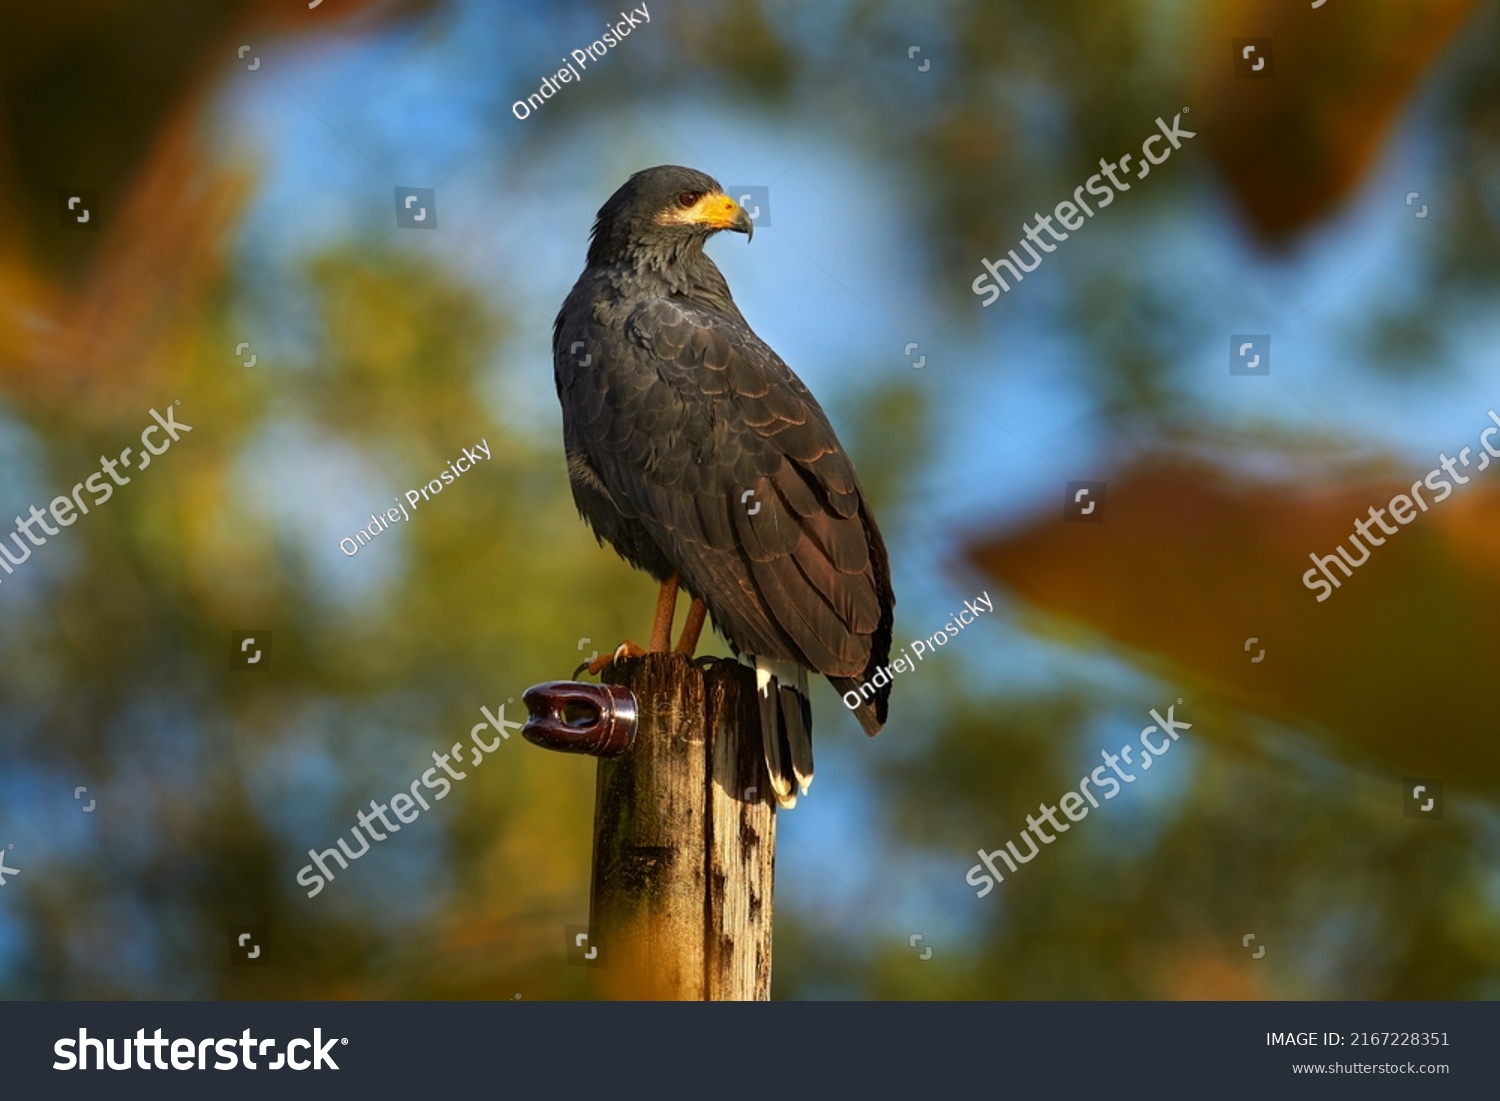 Zone-tailed Hawk, Buteo albonotatua, bird of prey sitting on the electricity pole, forest habitat in the background, Dominical, Costa Rica. Wildlife nature, Central America. #2167228351